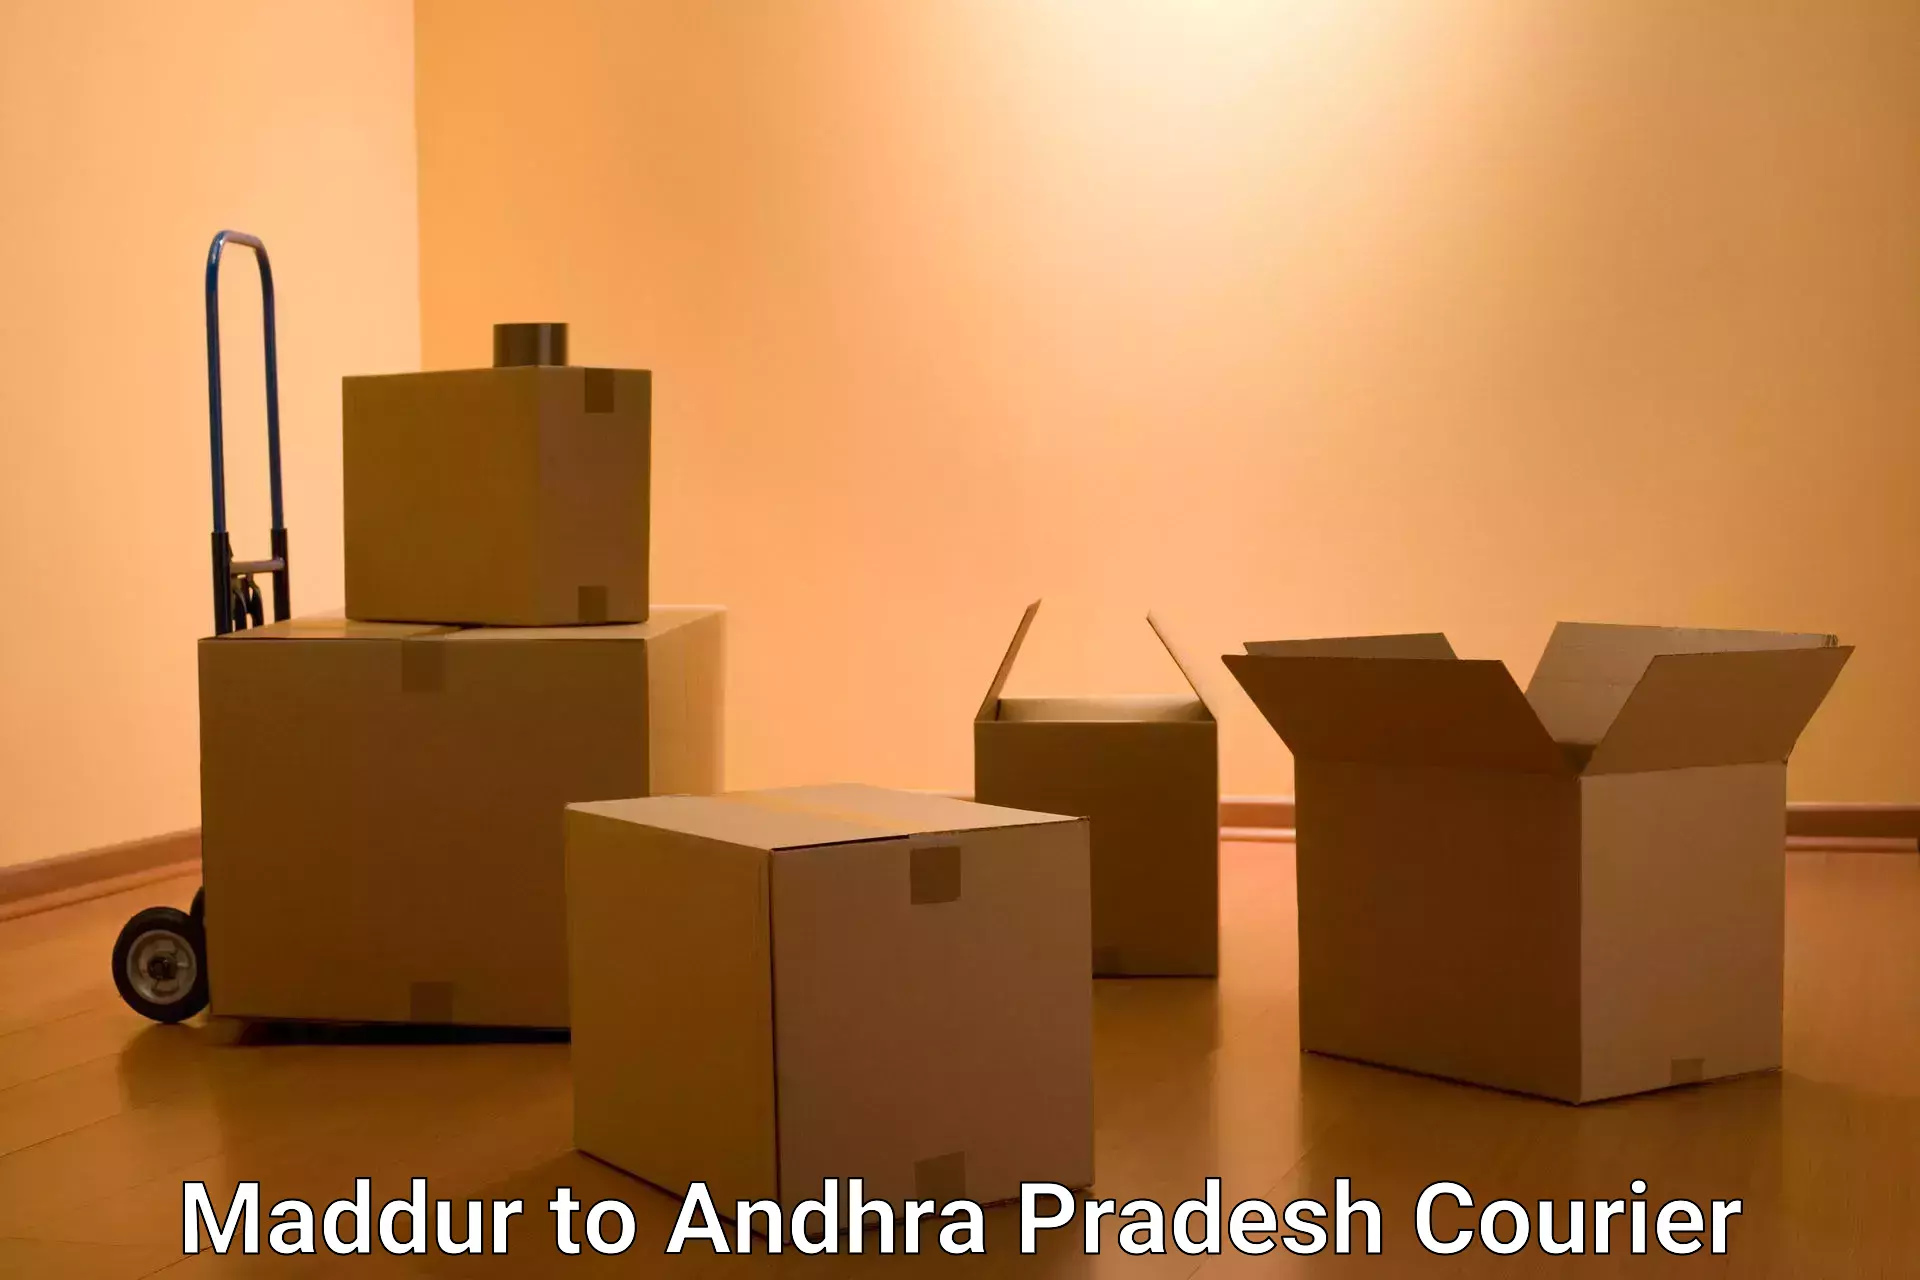 Reliable courier service Maddur to Pedabayalu